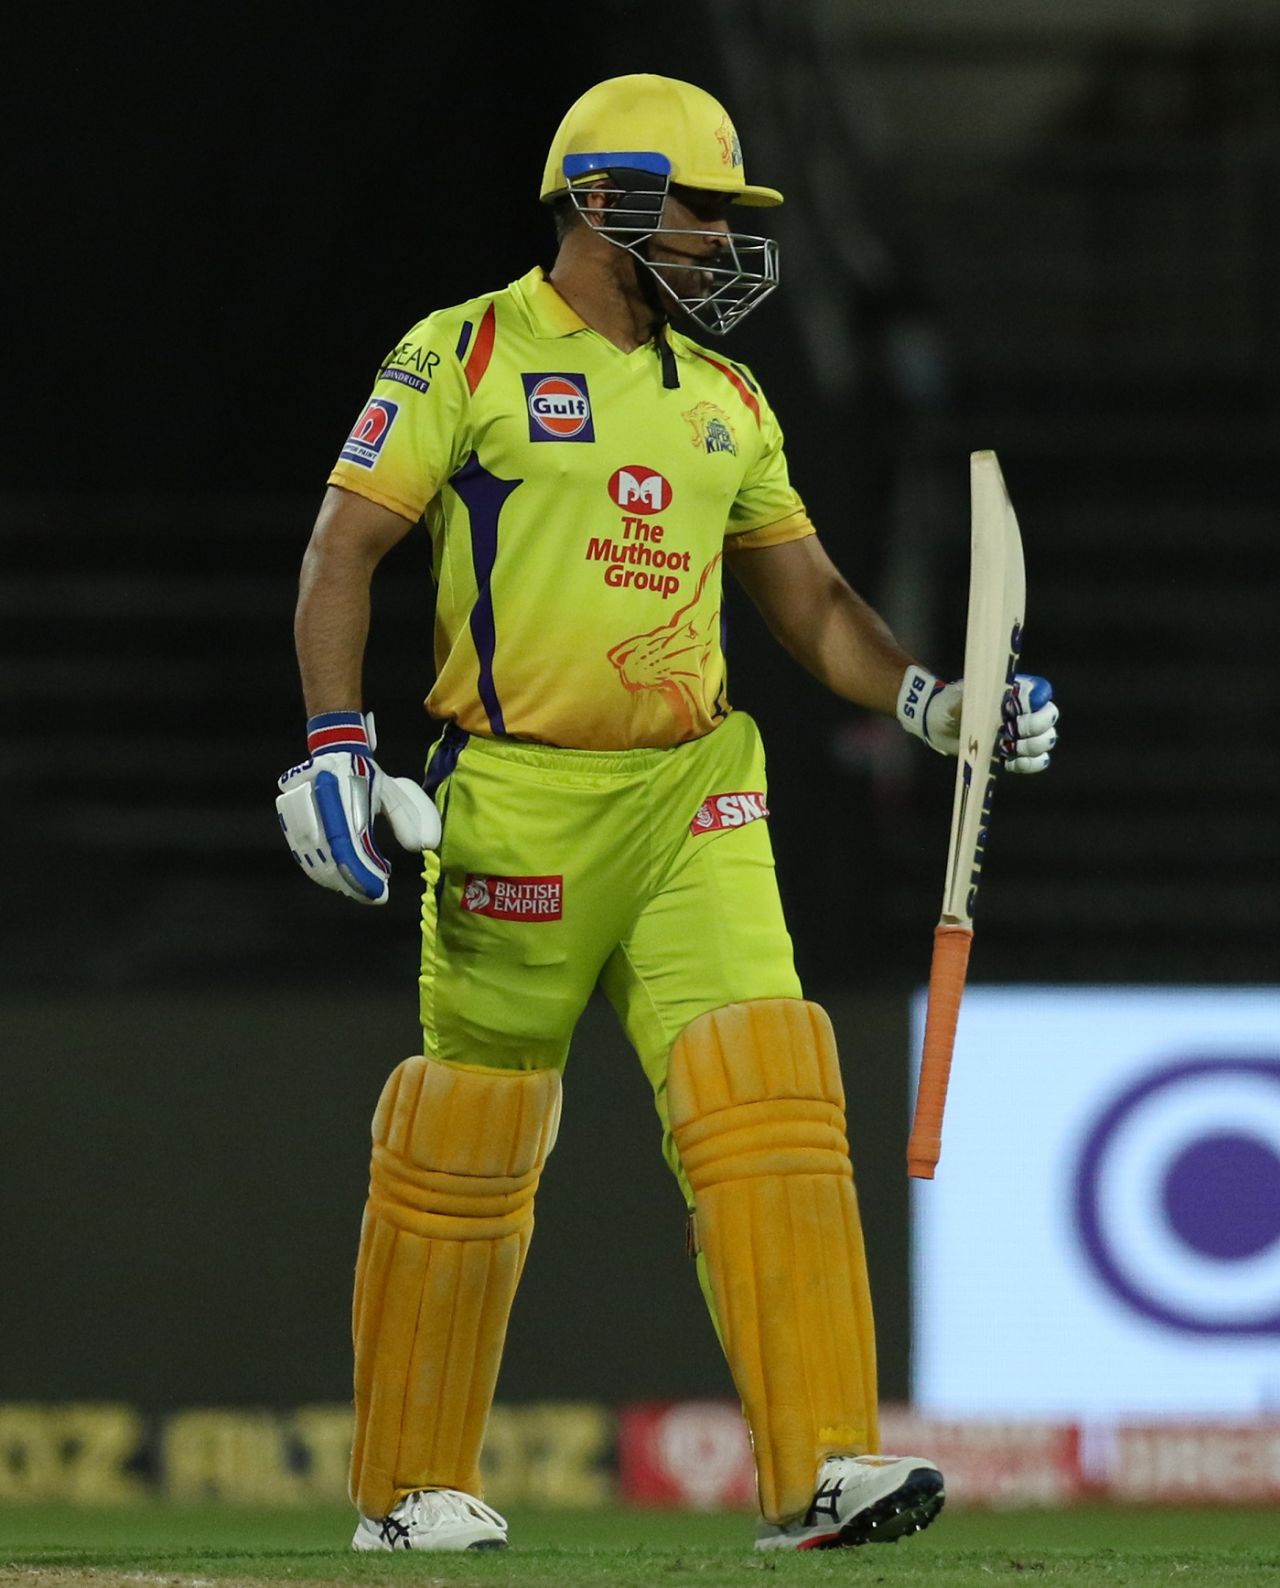 MS Dhoni had another poor day with the bat, Delhi Capitals vs Chennai Super Kings, IPL 2020, Sharjah, October 17, 2020